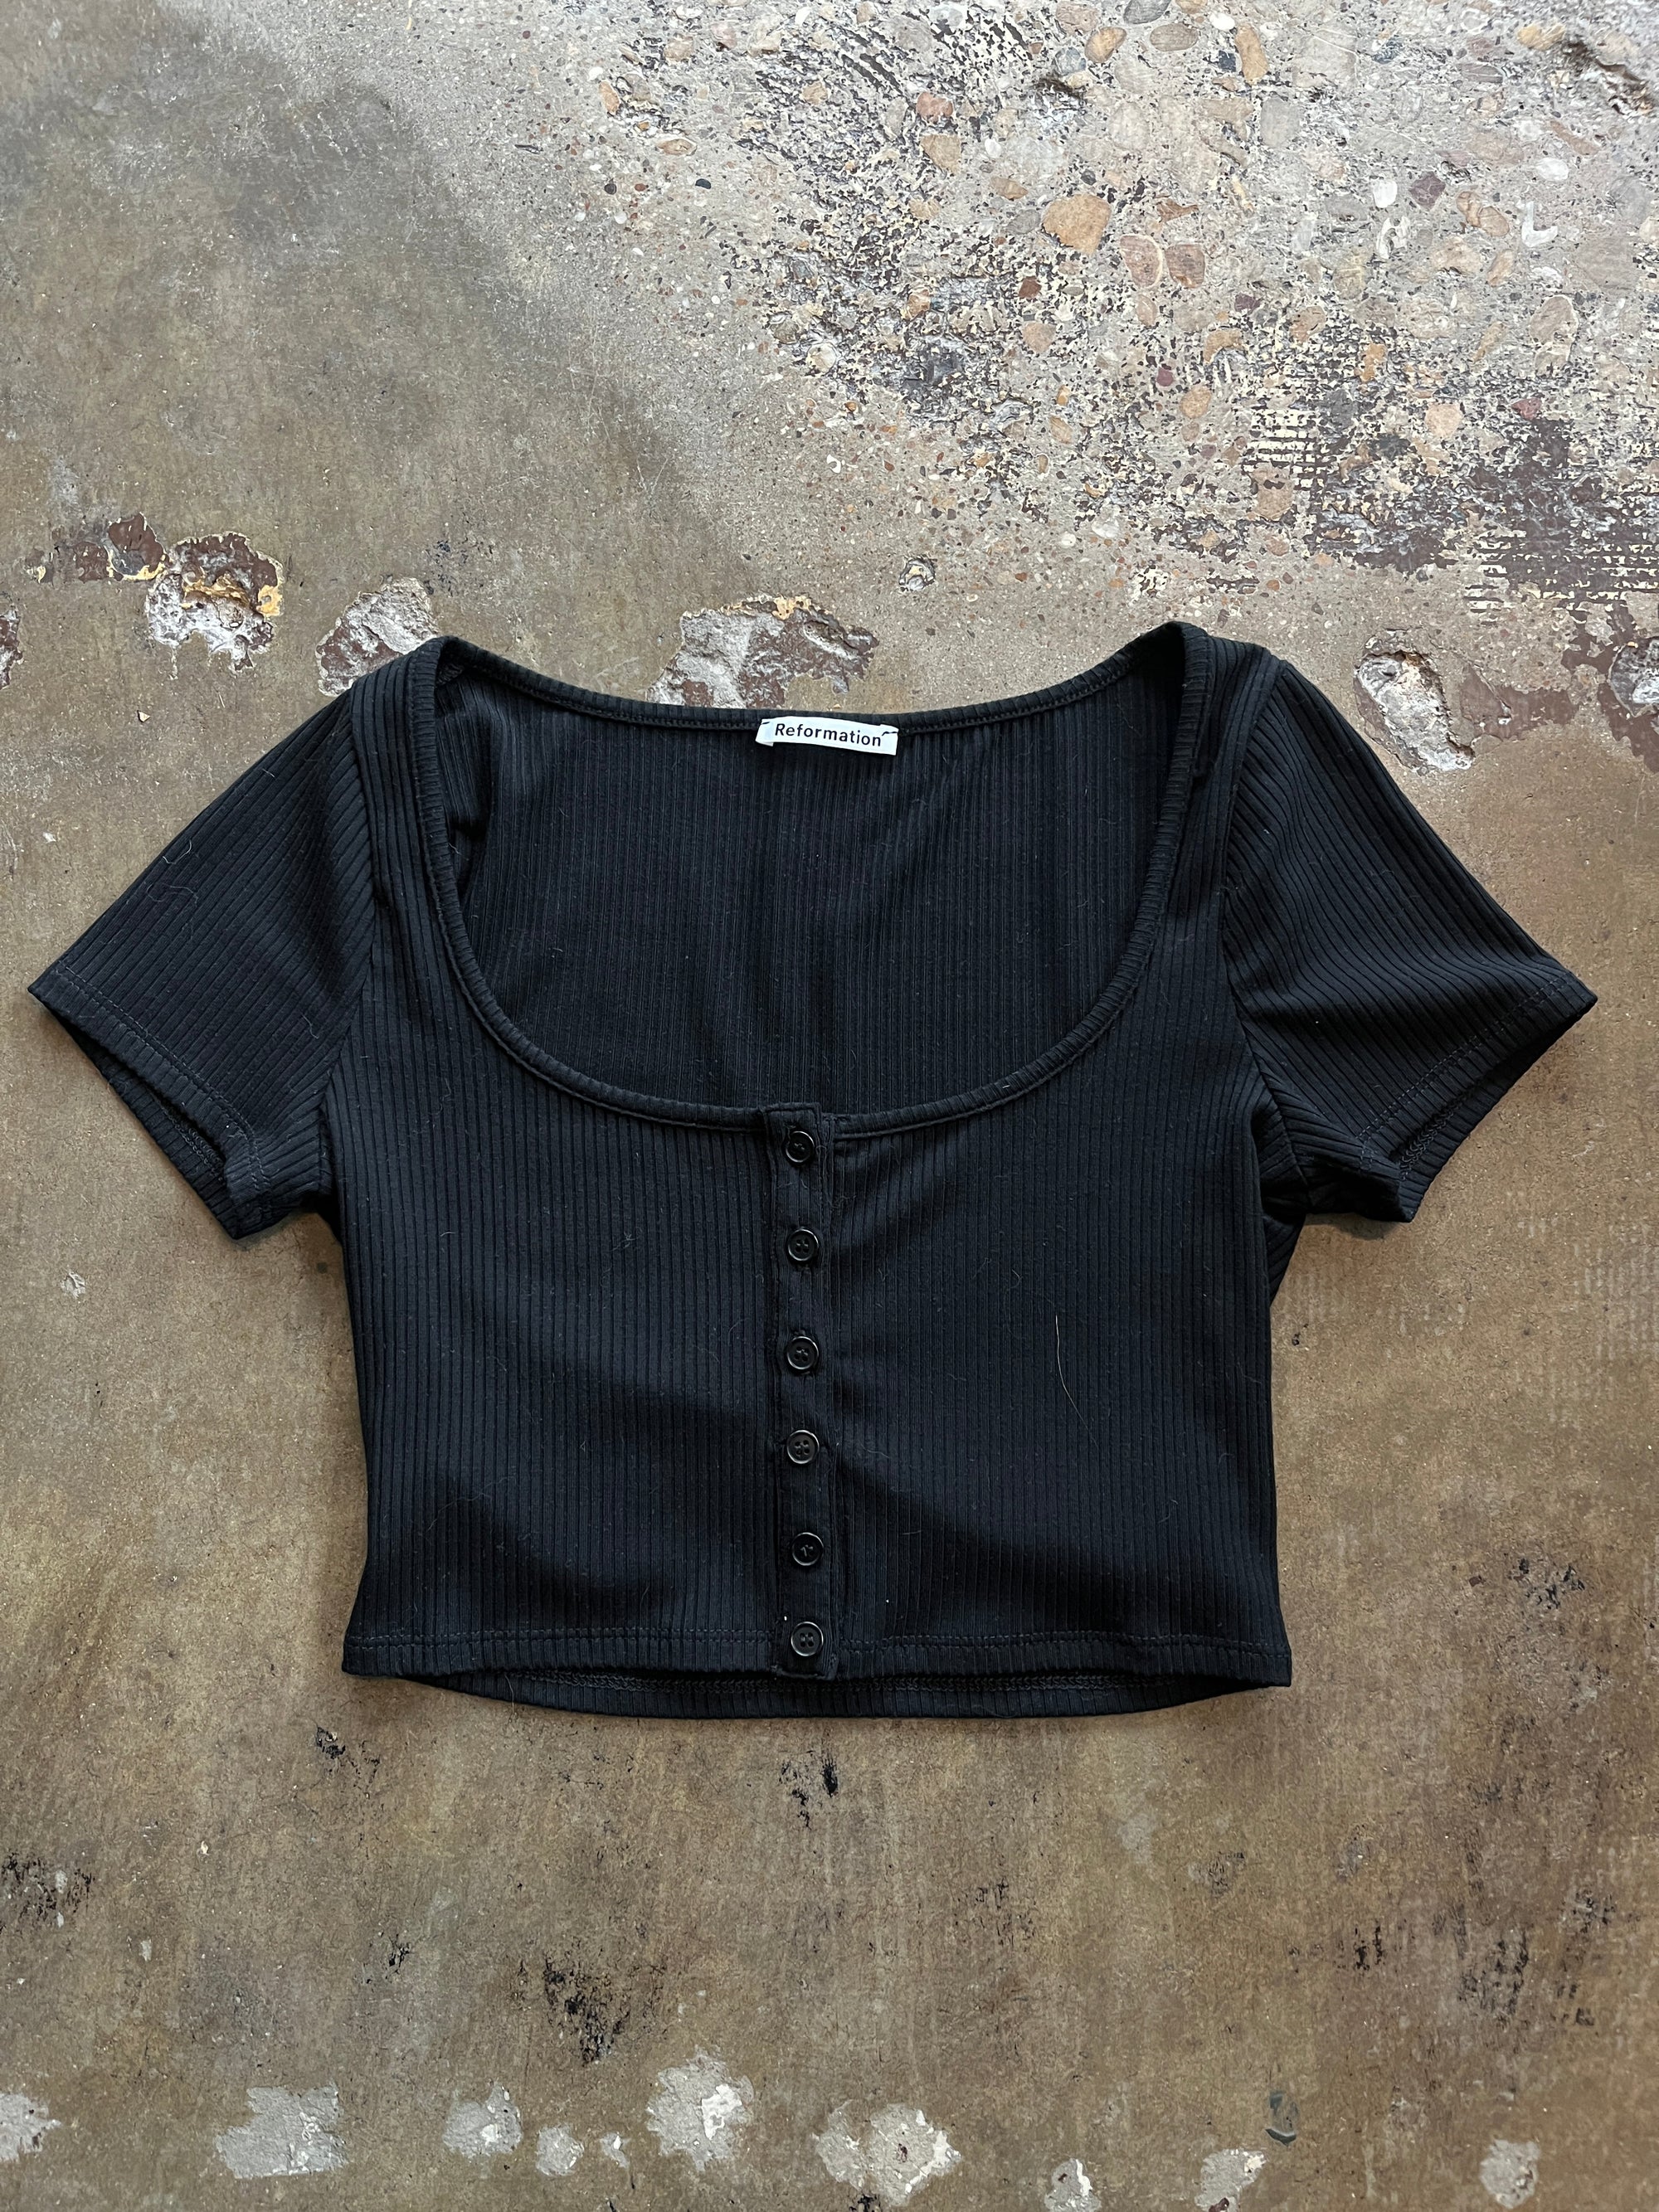 Reformation Black Button Front Ribbed Crop Top